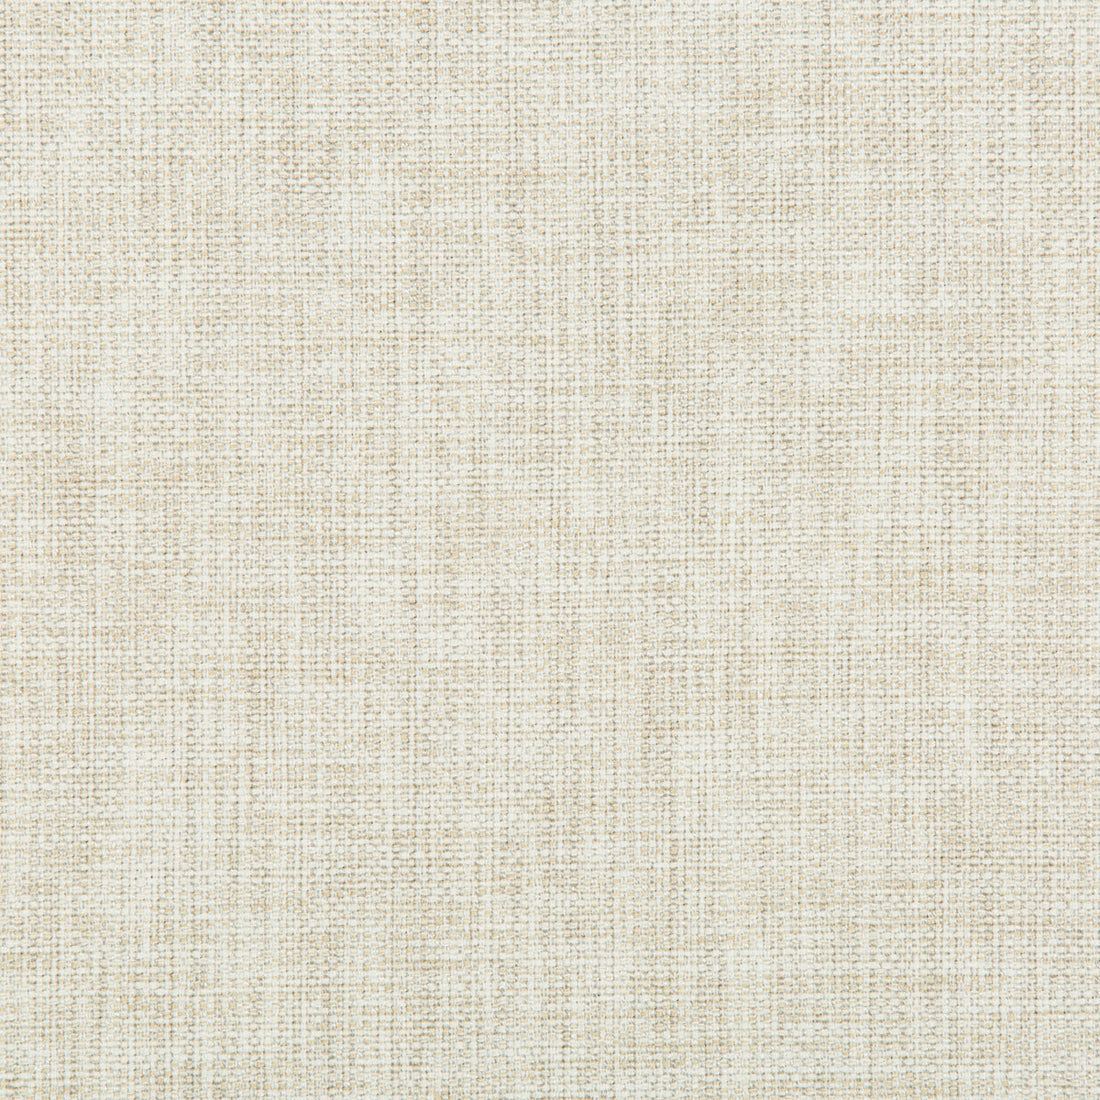 Kravet Contract fabric in 35179-116 color - pattern 35179.116.0 - by Kravet Contract